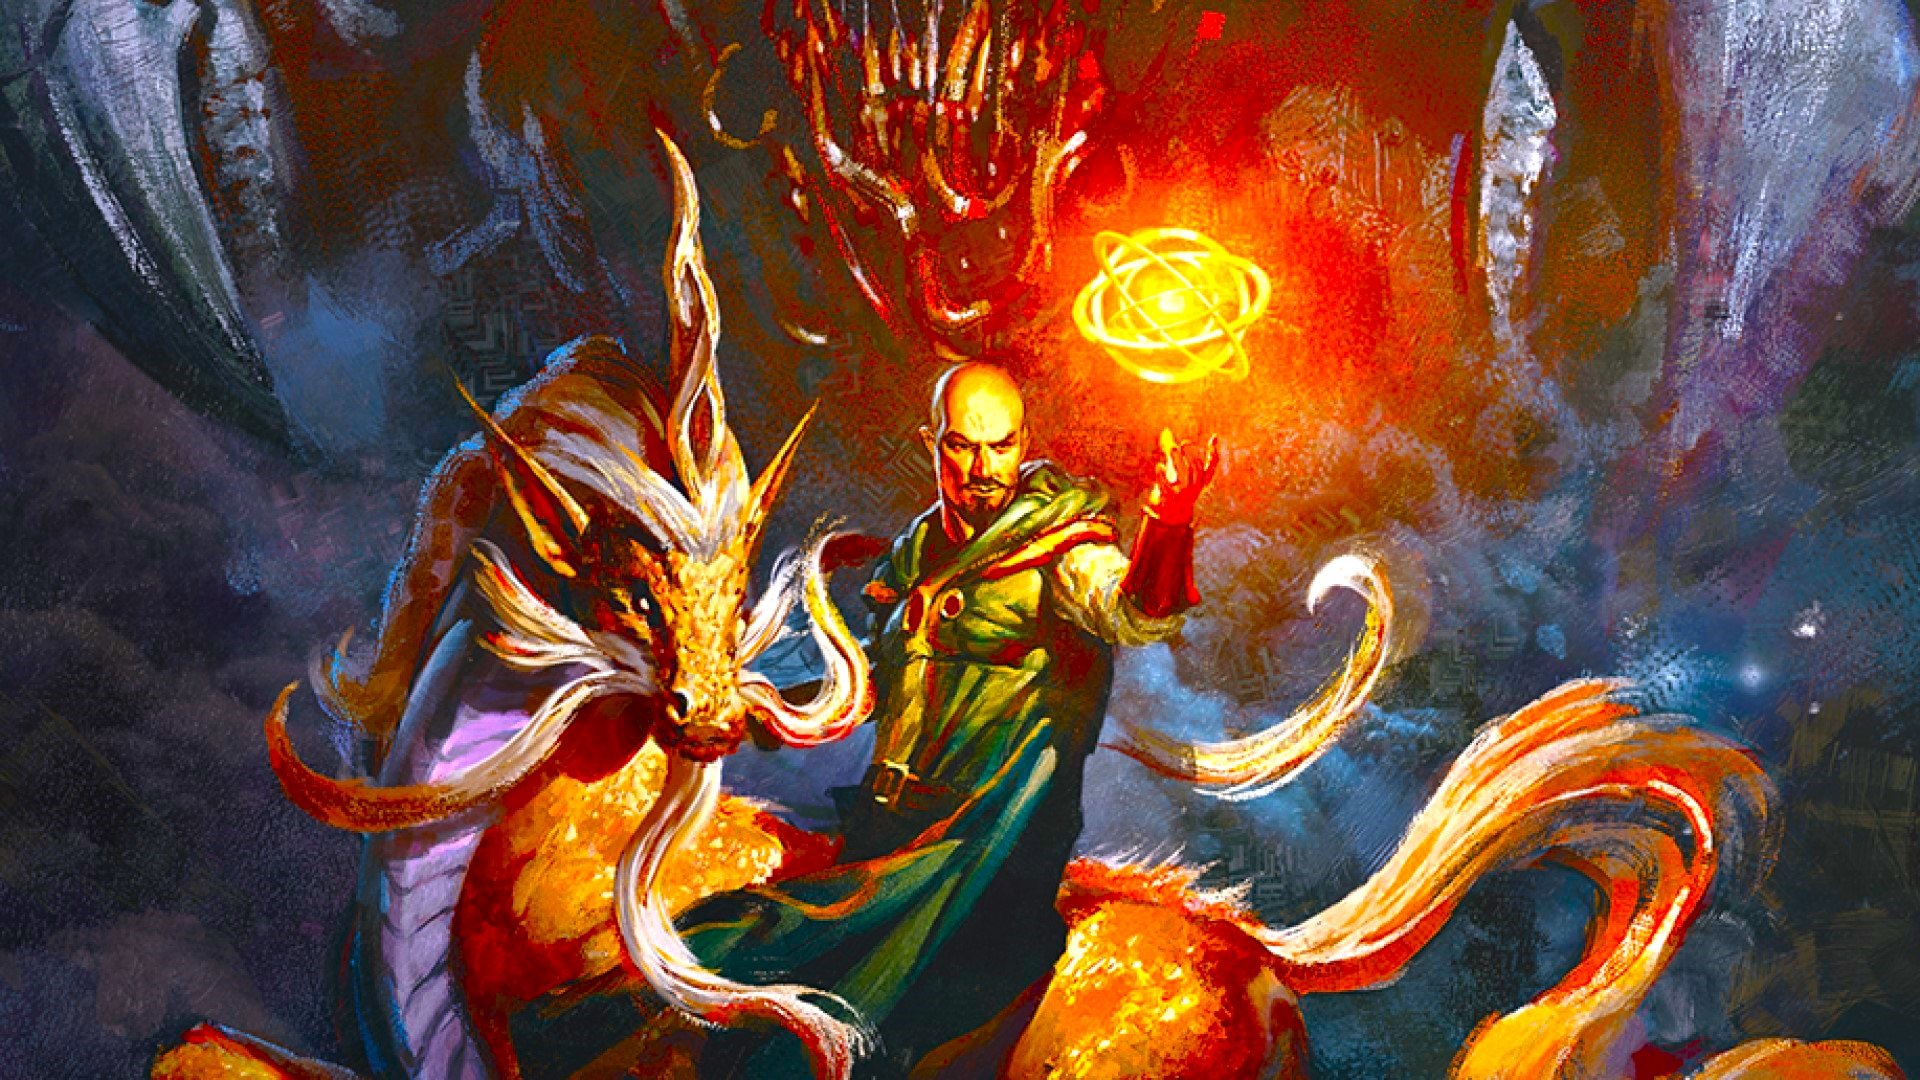 DnD hold person 5e - a bald man in green robes rides a creature that looks like it's a unicorn crossed with a dragon, and he casts a golden ball of magic with his right hand